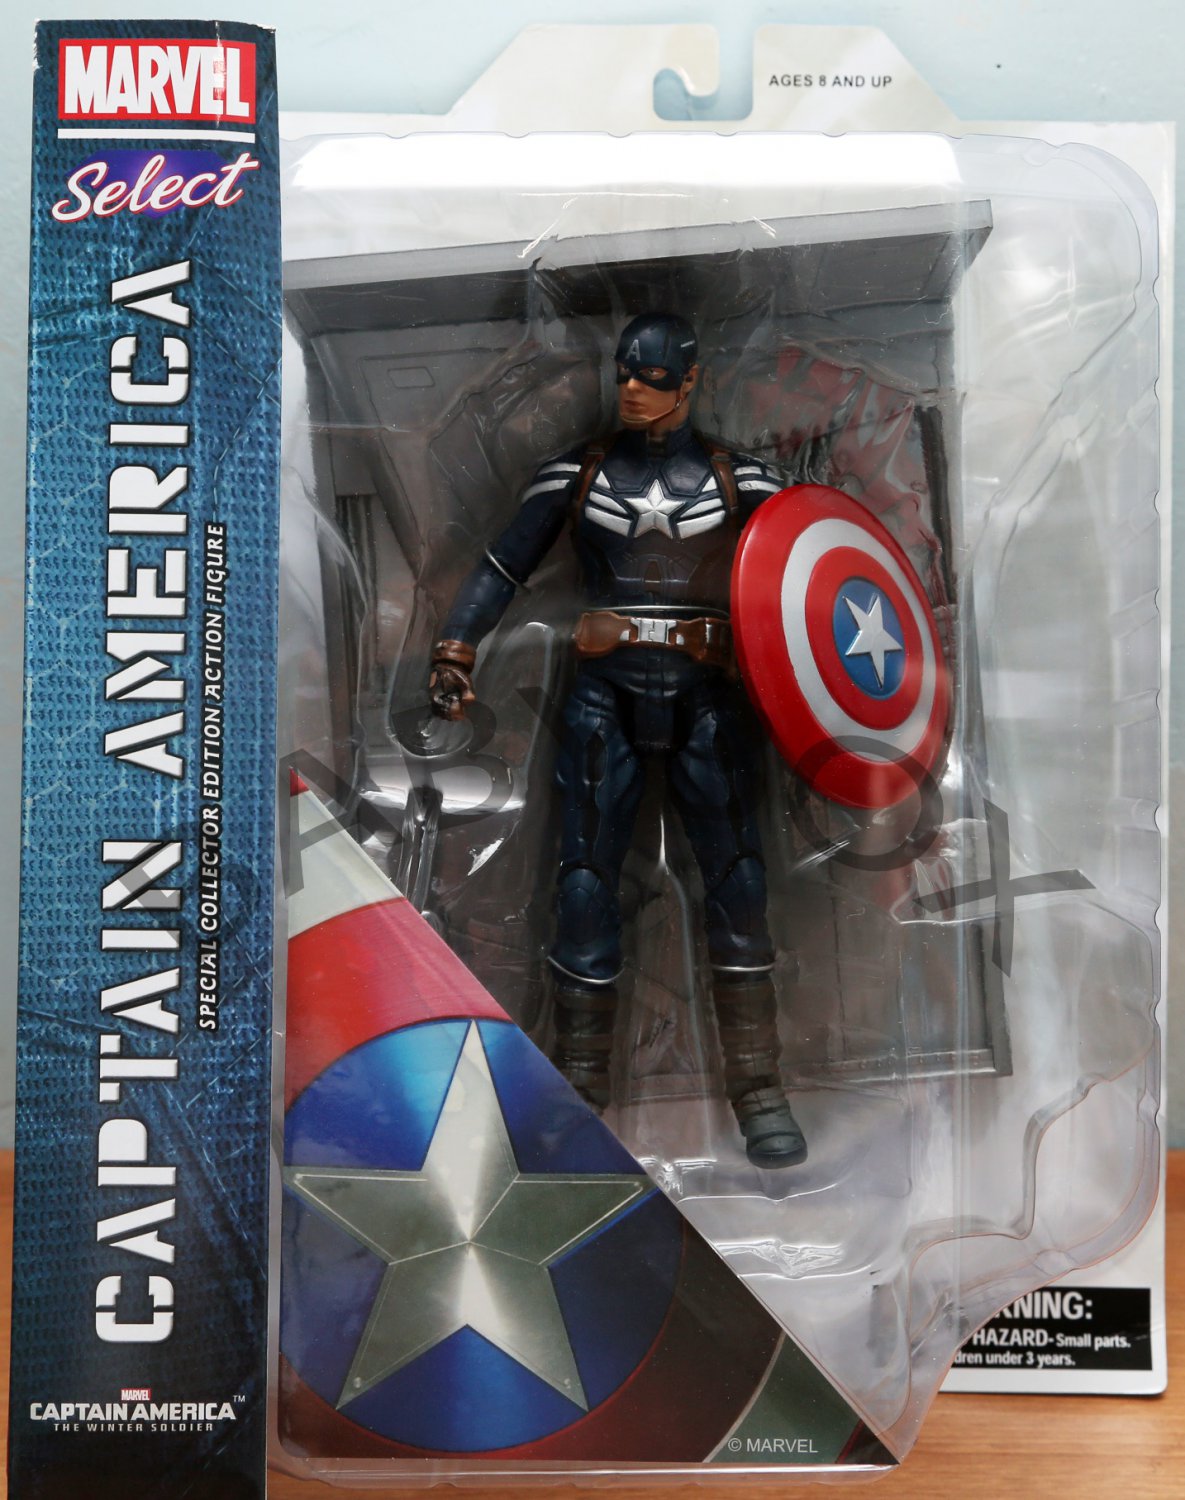 CAPTAIN AMERICA Action Figure Marvel Select Disney Special